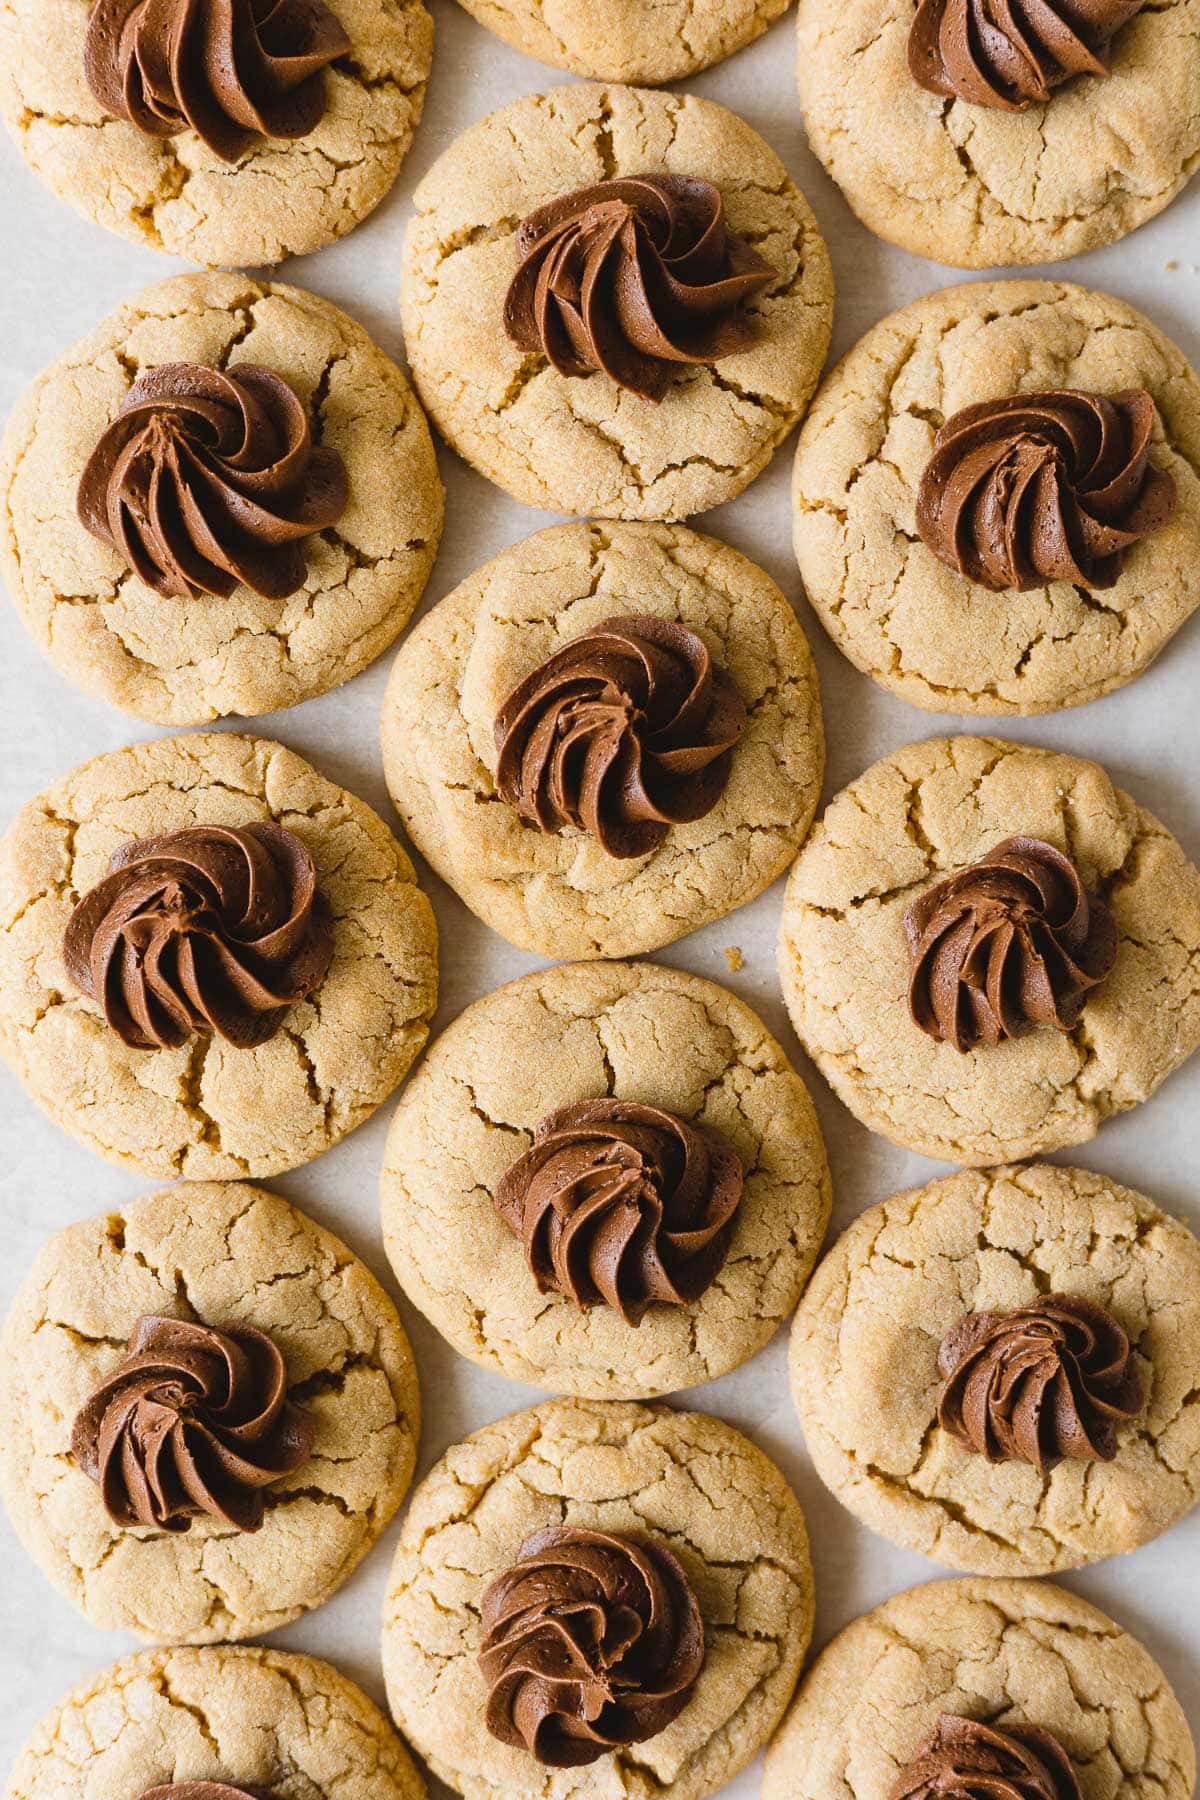 Crackled peanut butter cookies topped with swirls of fudge frosting.